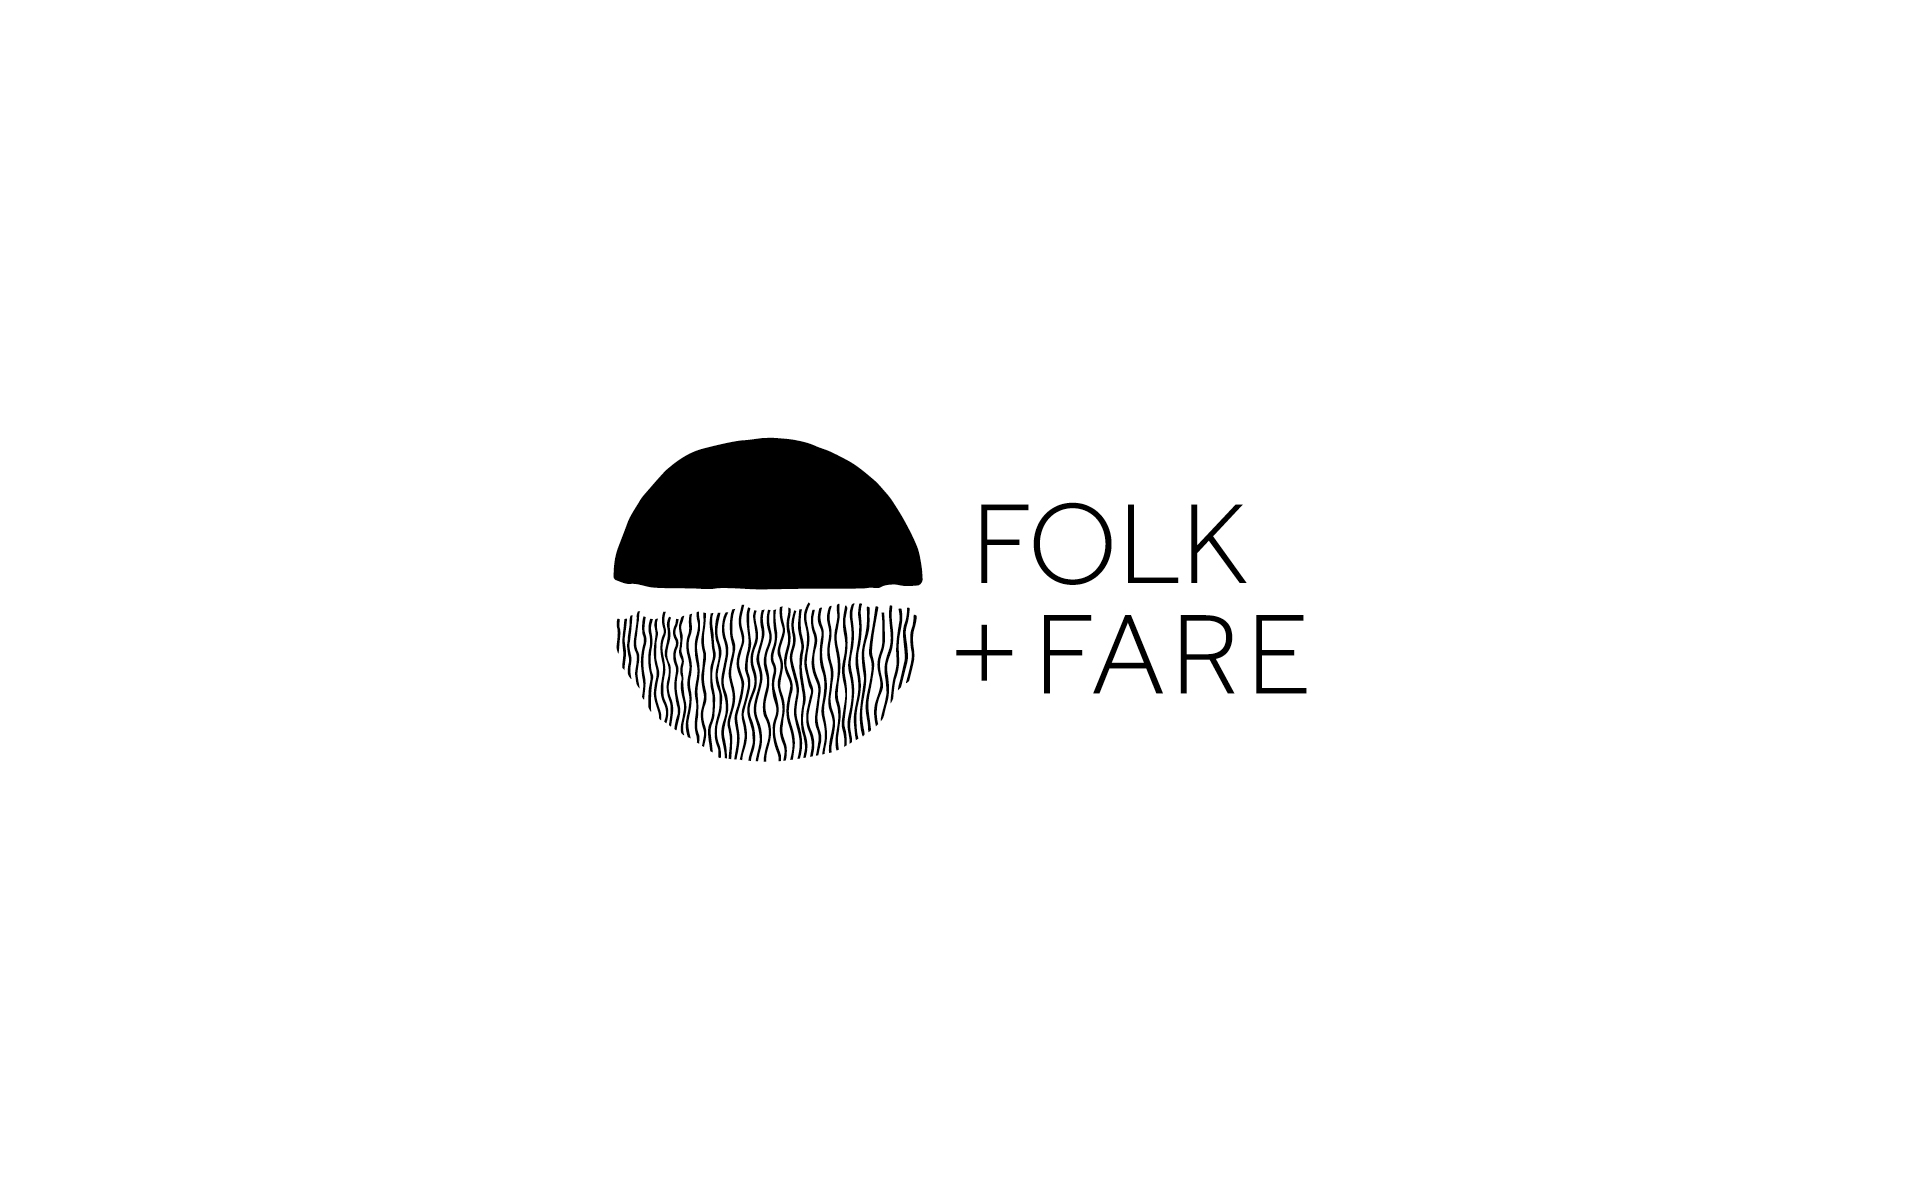 Logomark and logotype for Folk and Fare brand identity